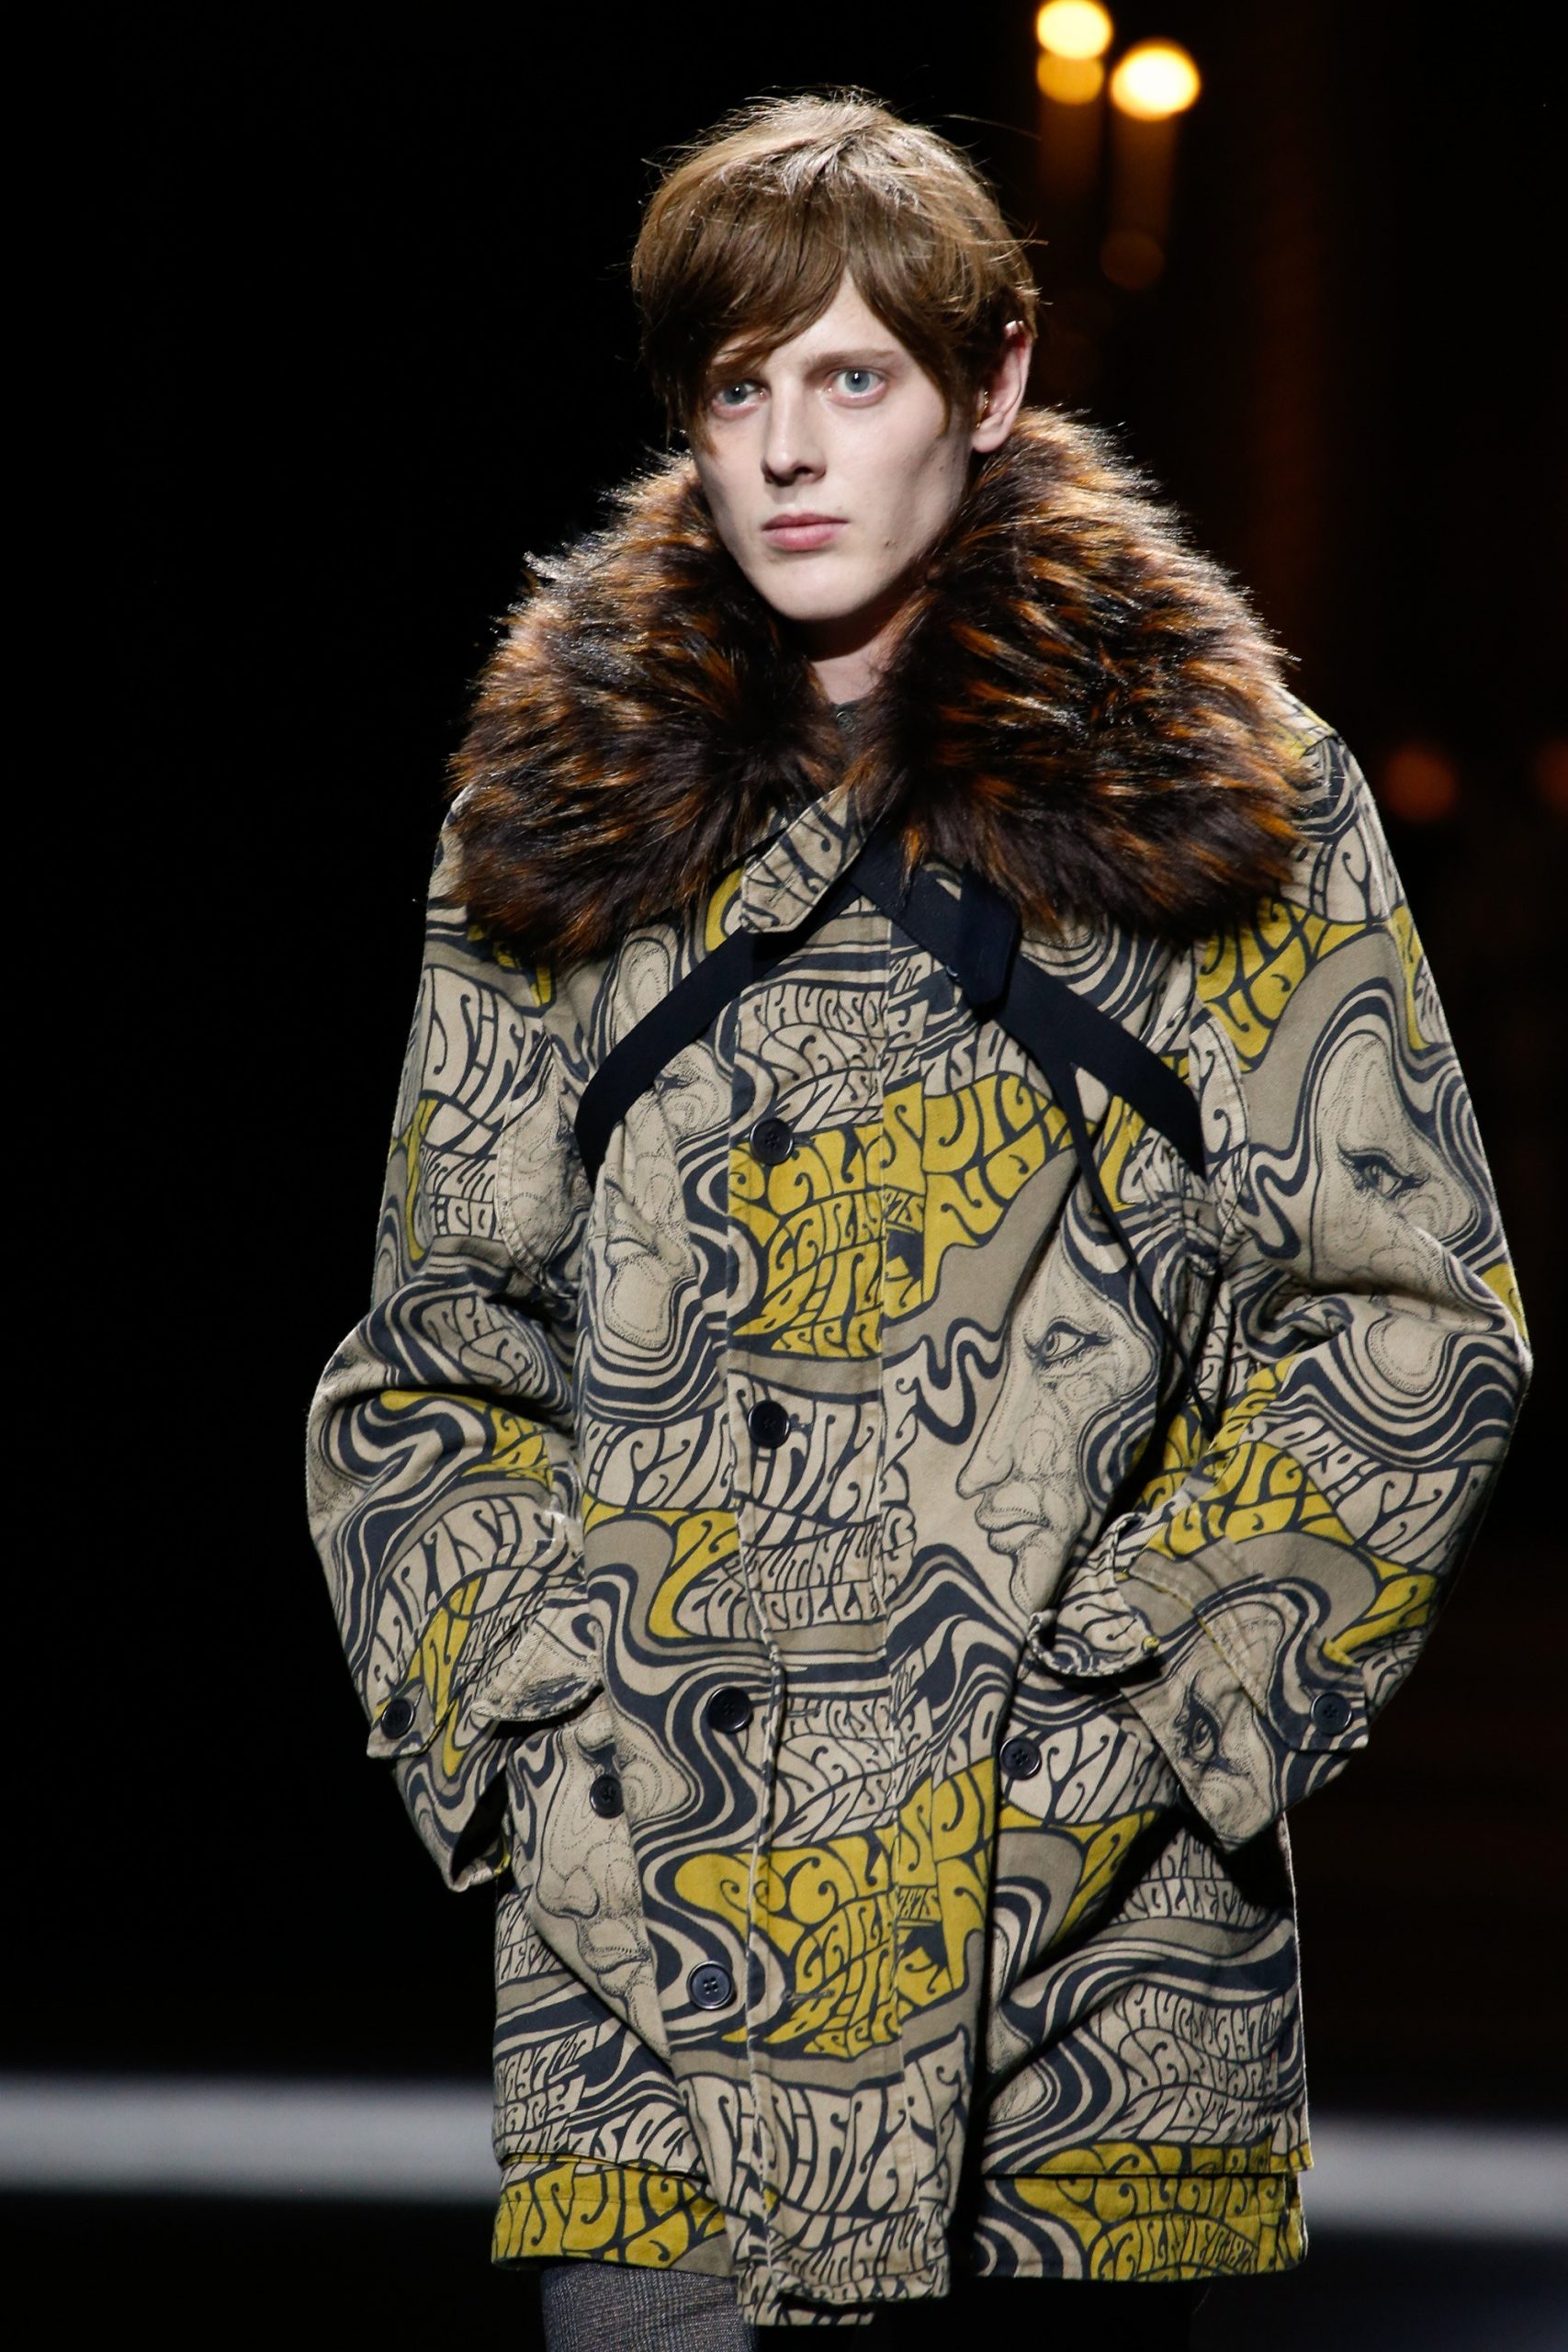 photograph of a male model walking a runway wearing a psychedelic era inspired coat